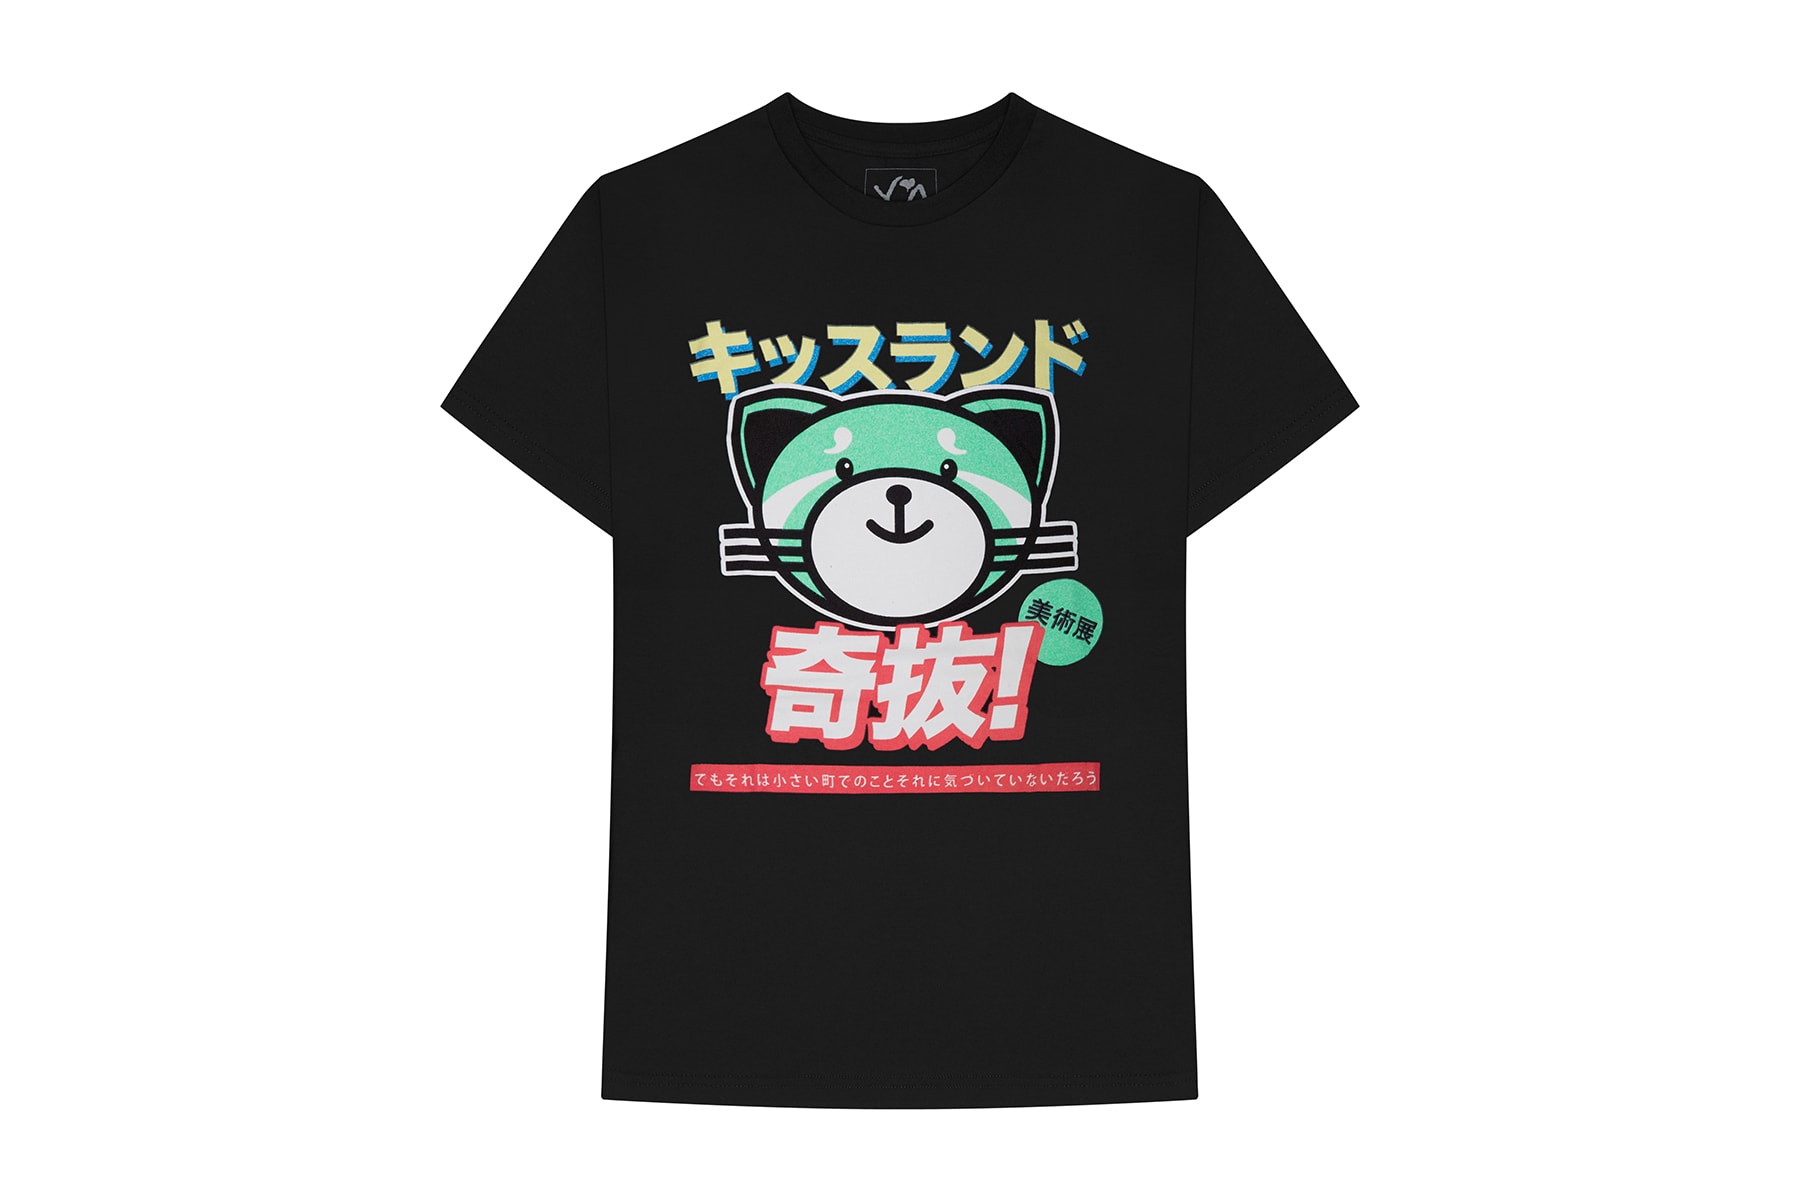 The Weeknd kiss land 5 anniversary drop release date web store release date info september 10 2018 closer look limited edition red panda fox character bearbrick figure vinyl medicom toy hoodie tee shirt face mask hat